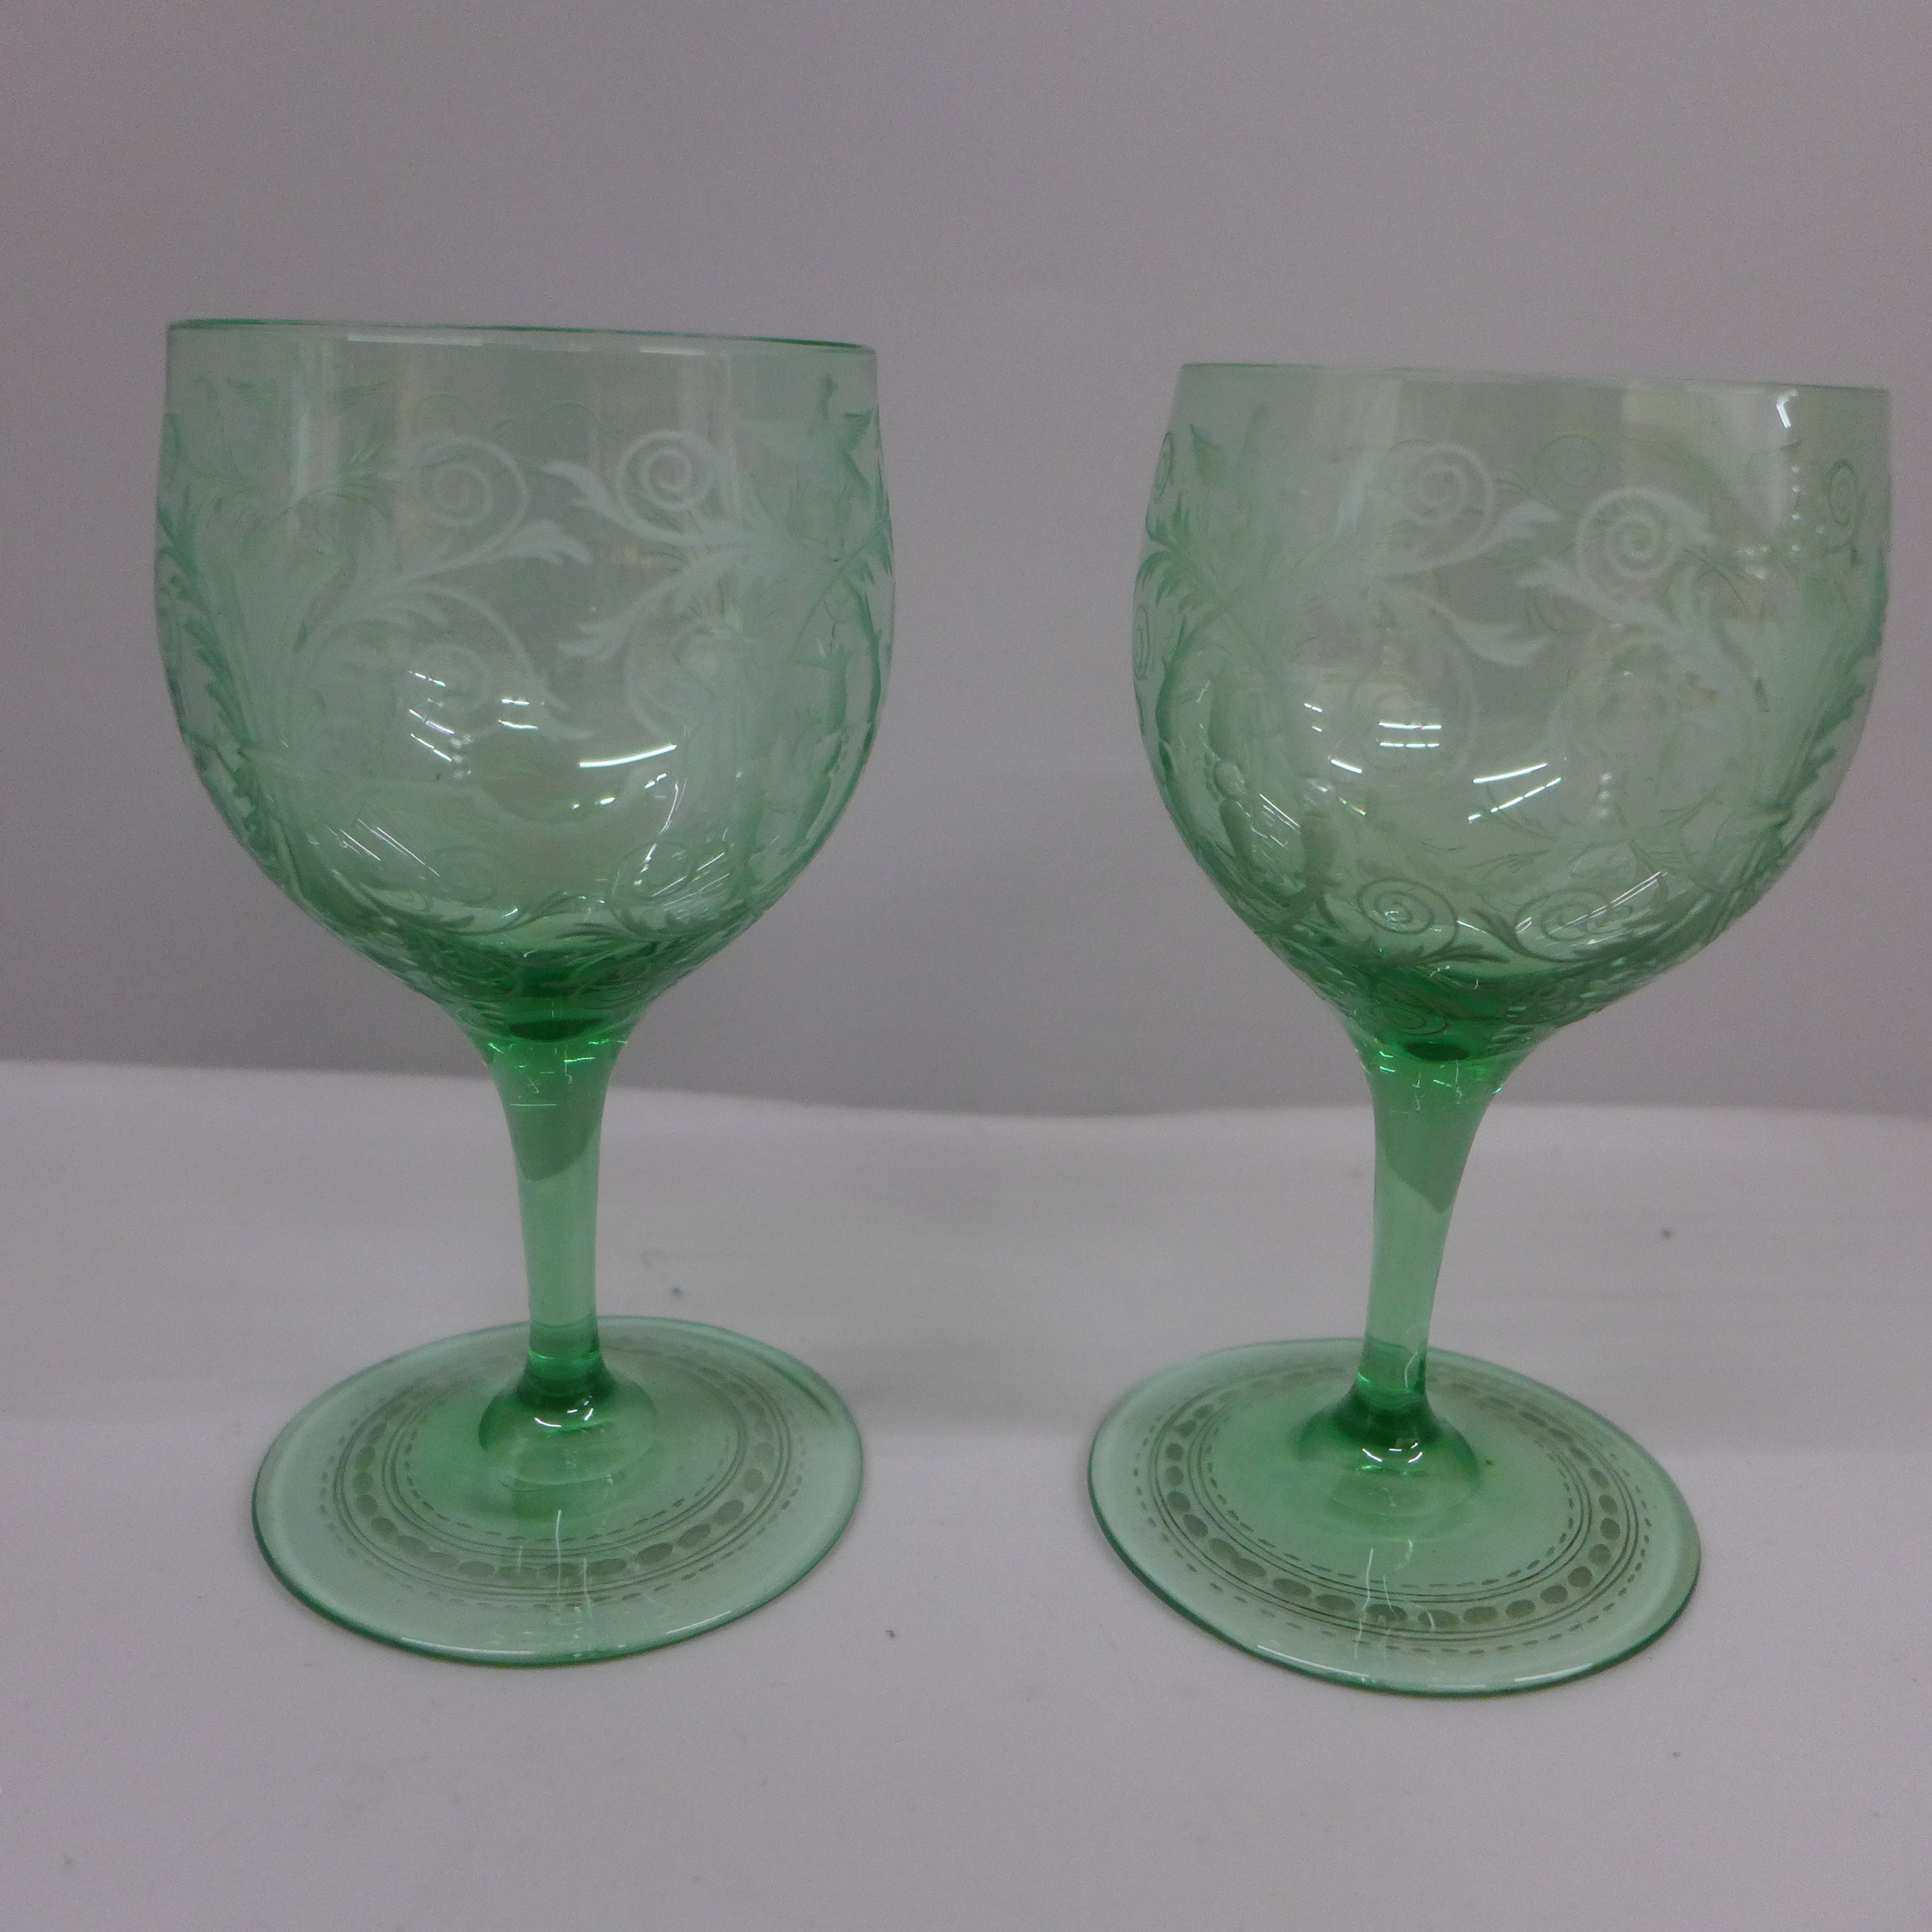 A pair of green wine glasses, engraved with rococo design, circa 1880, possibly Austro-Hungarian